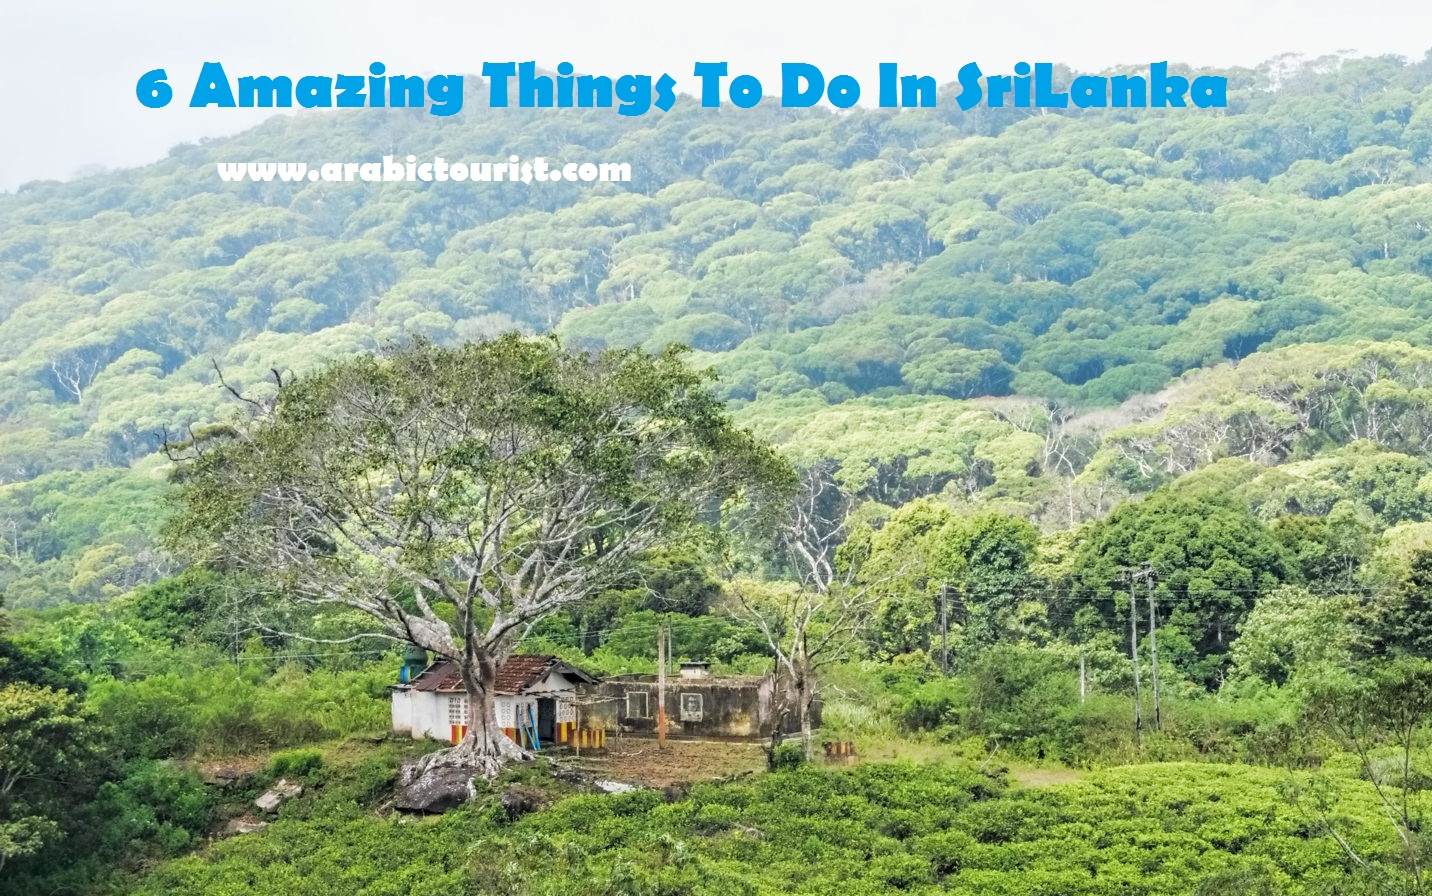 6 Amazing Things To Do In SriLanka